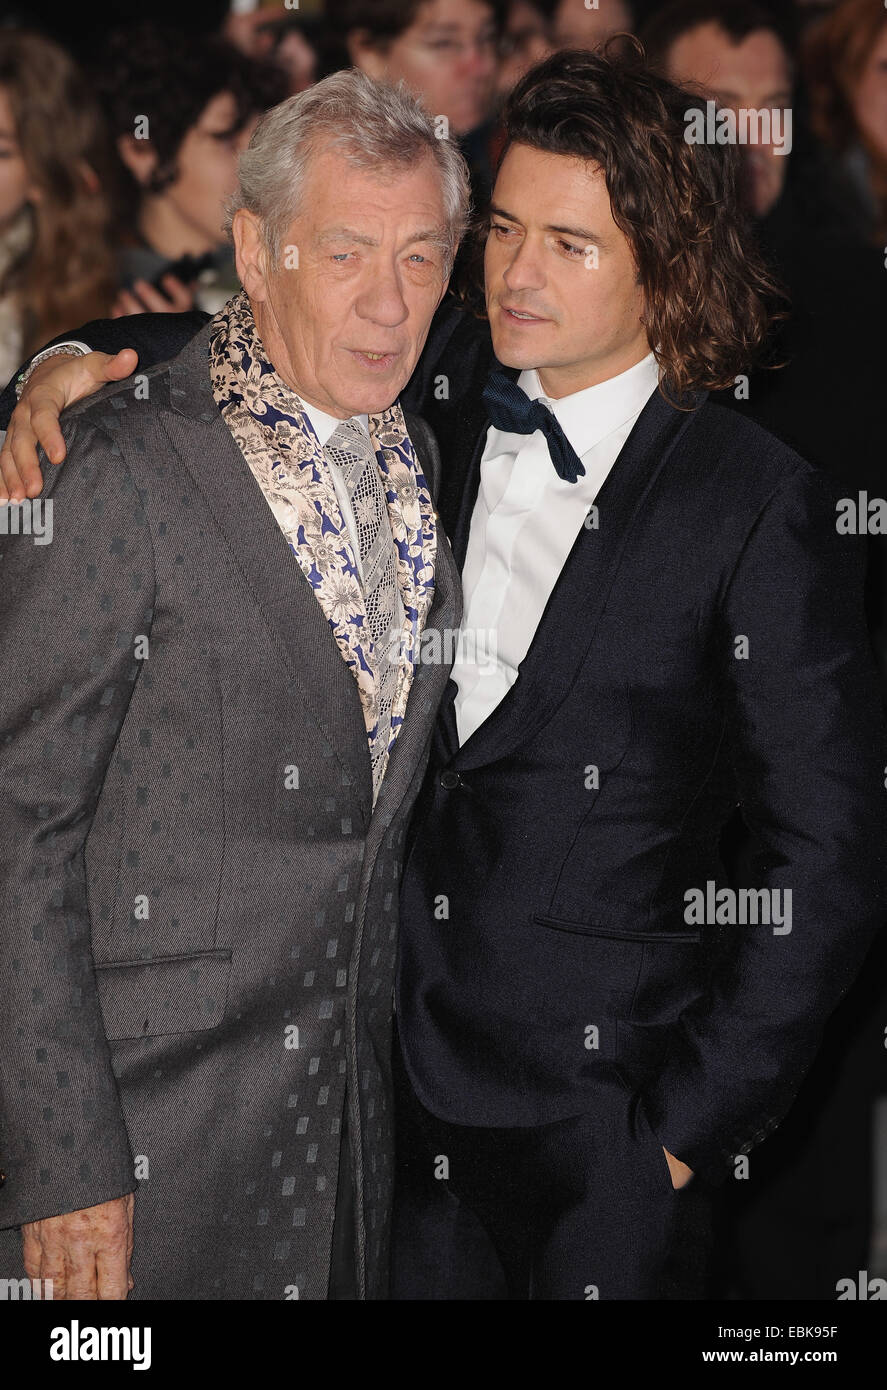 London, UK. 1st Jan, 2015. Ian McKellen and Orlando Bloom attend the UK premiere of 'The Hobbit: Battle of the Five Armies' at Empire Leciester Square. Credit:  Ferdaus Shamim/ZUMA Wire/Alamy Live News Stock Photo